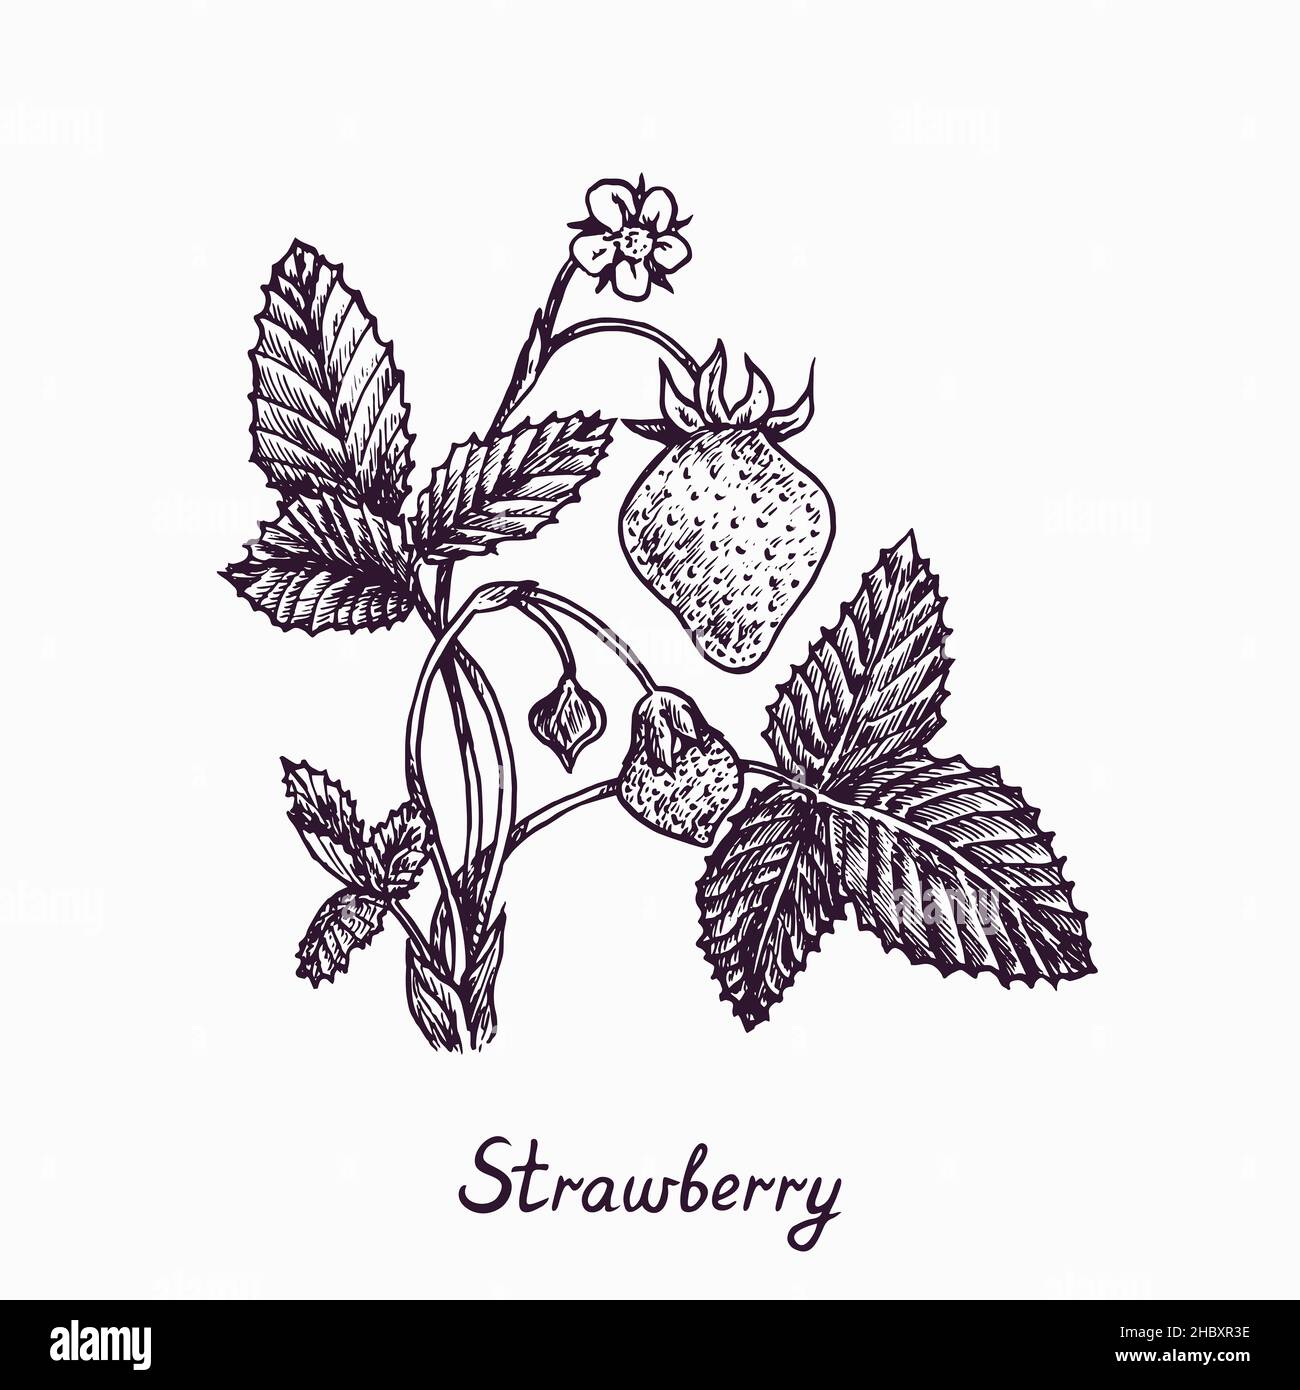 Strawberry plant with berries, flower and leaves, simple doodle drawing with inscription, gravure style Stock Photo